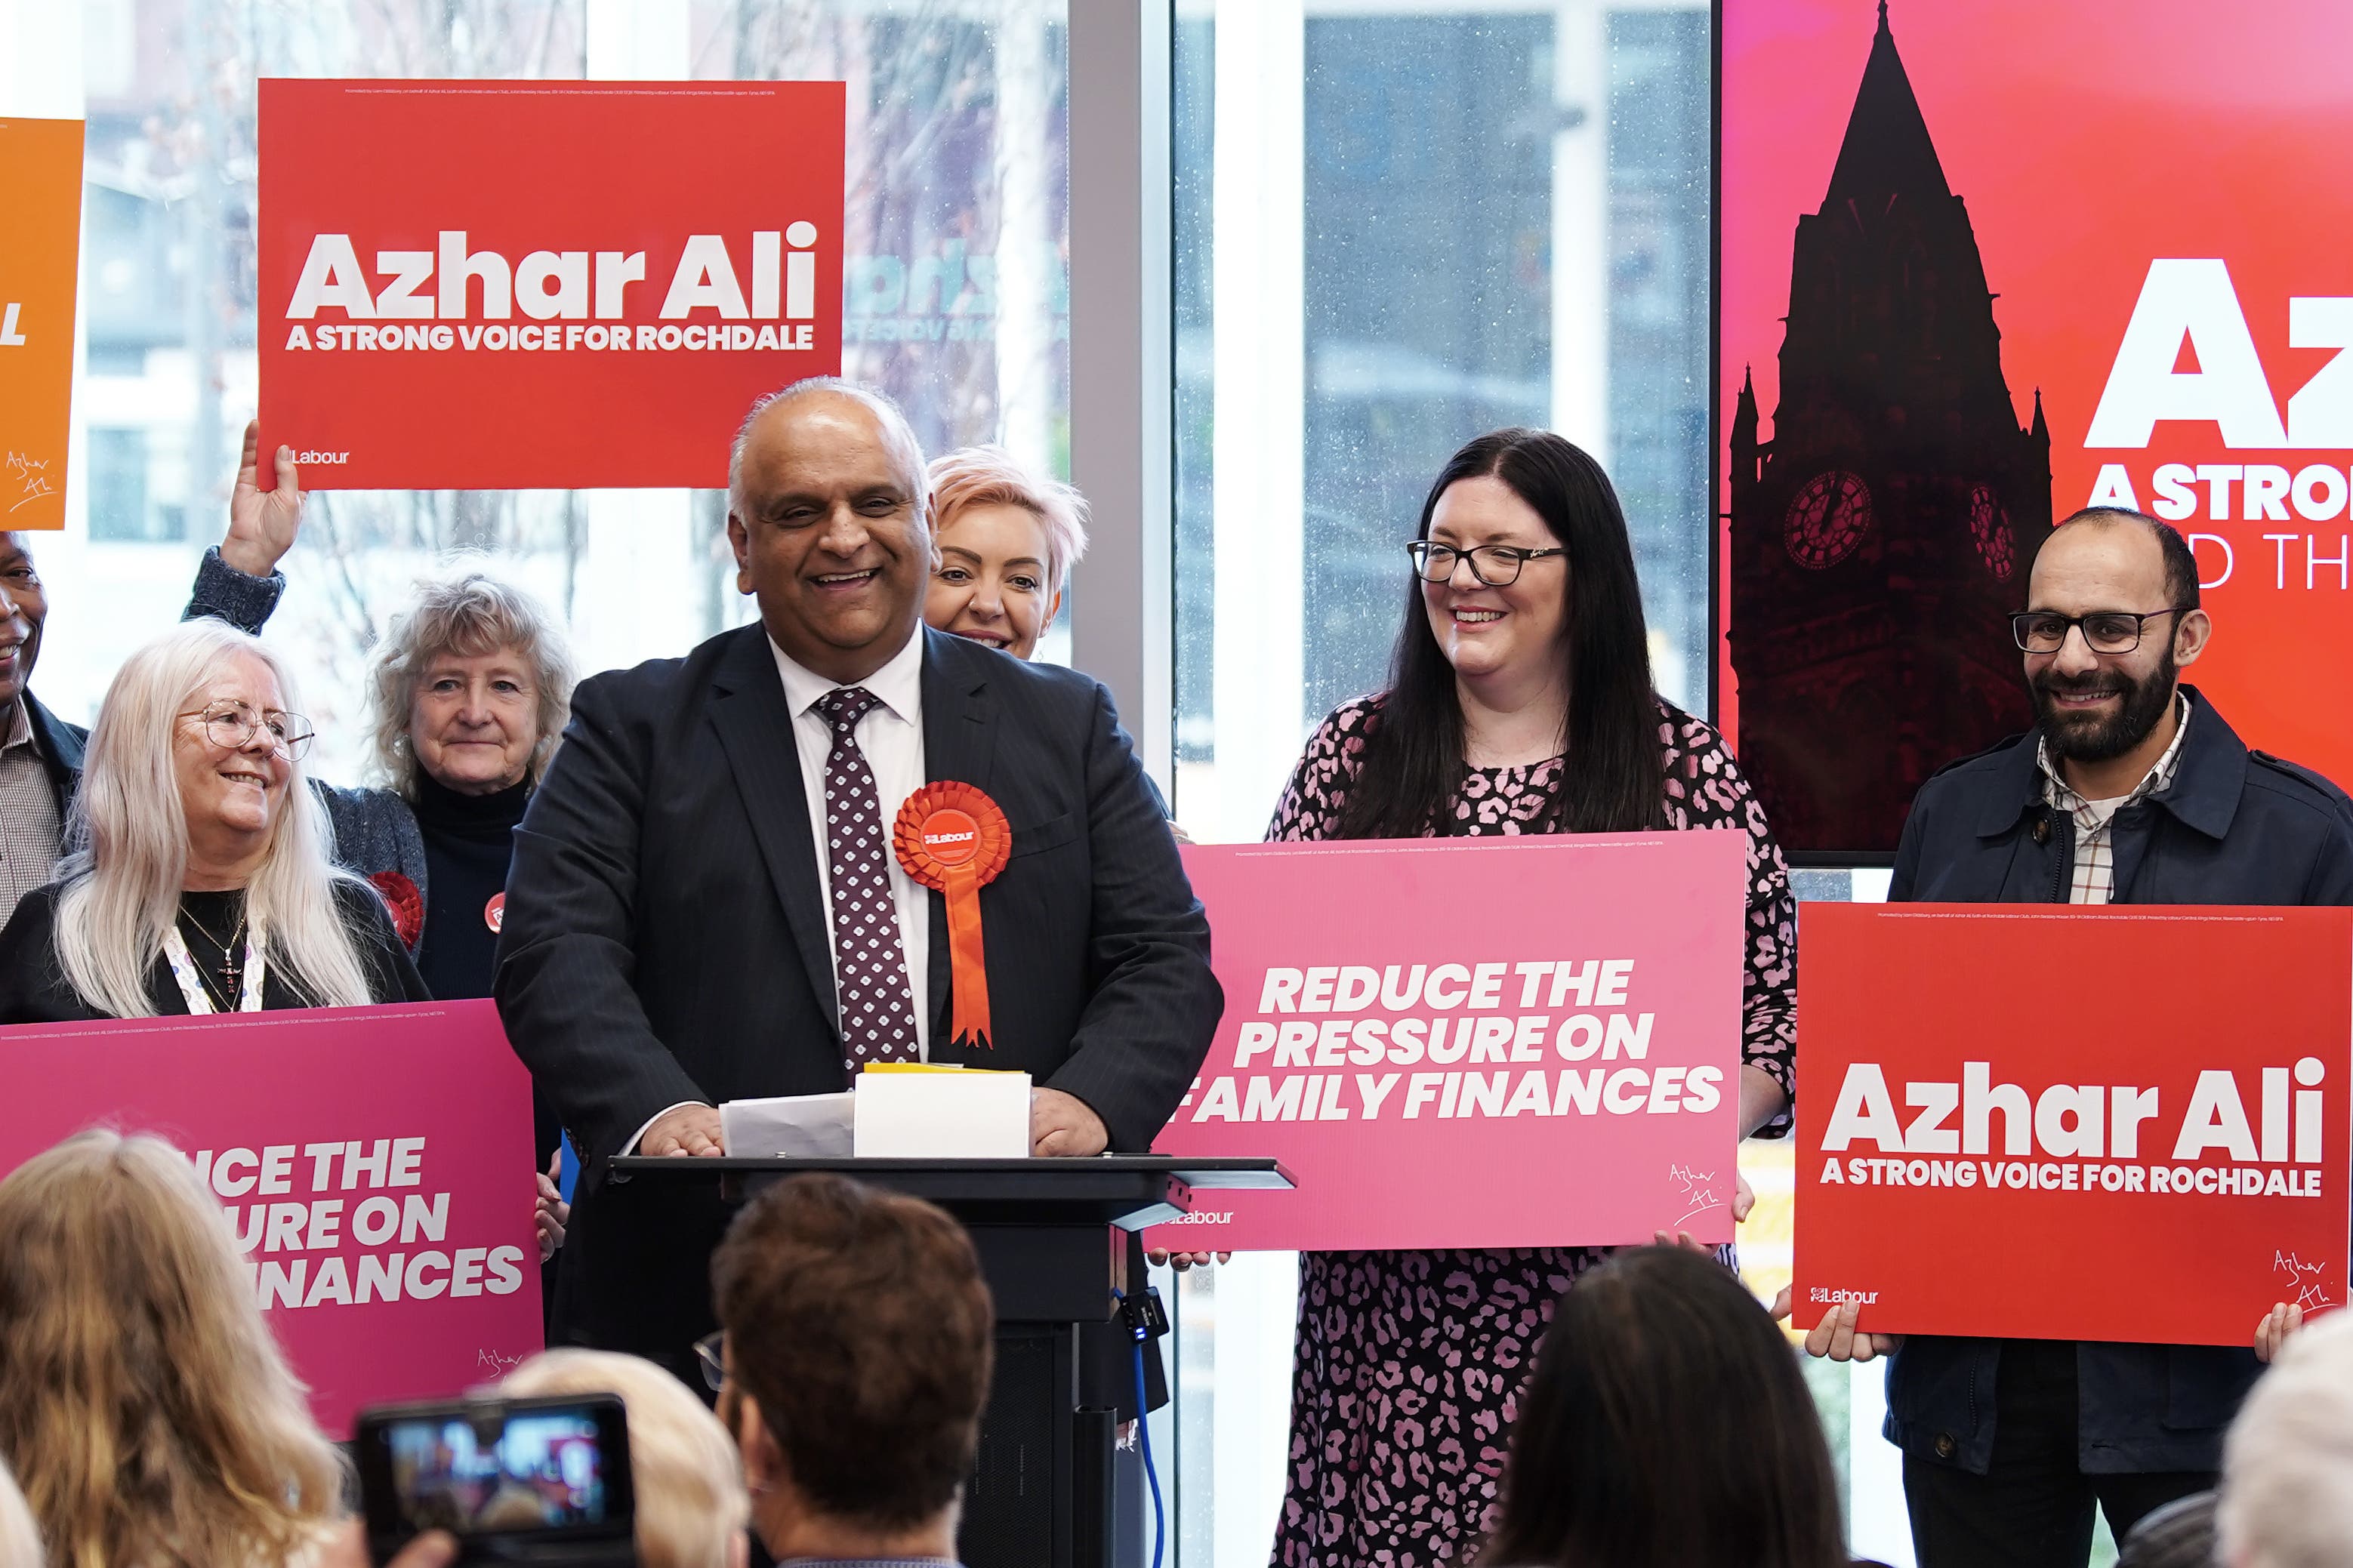 Rochdale’s by-election is due to take place this month, with Ali locked in as the Labour candidate